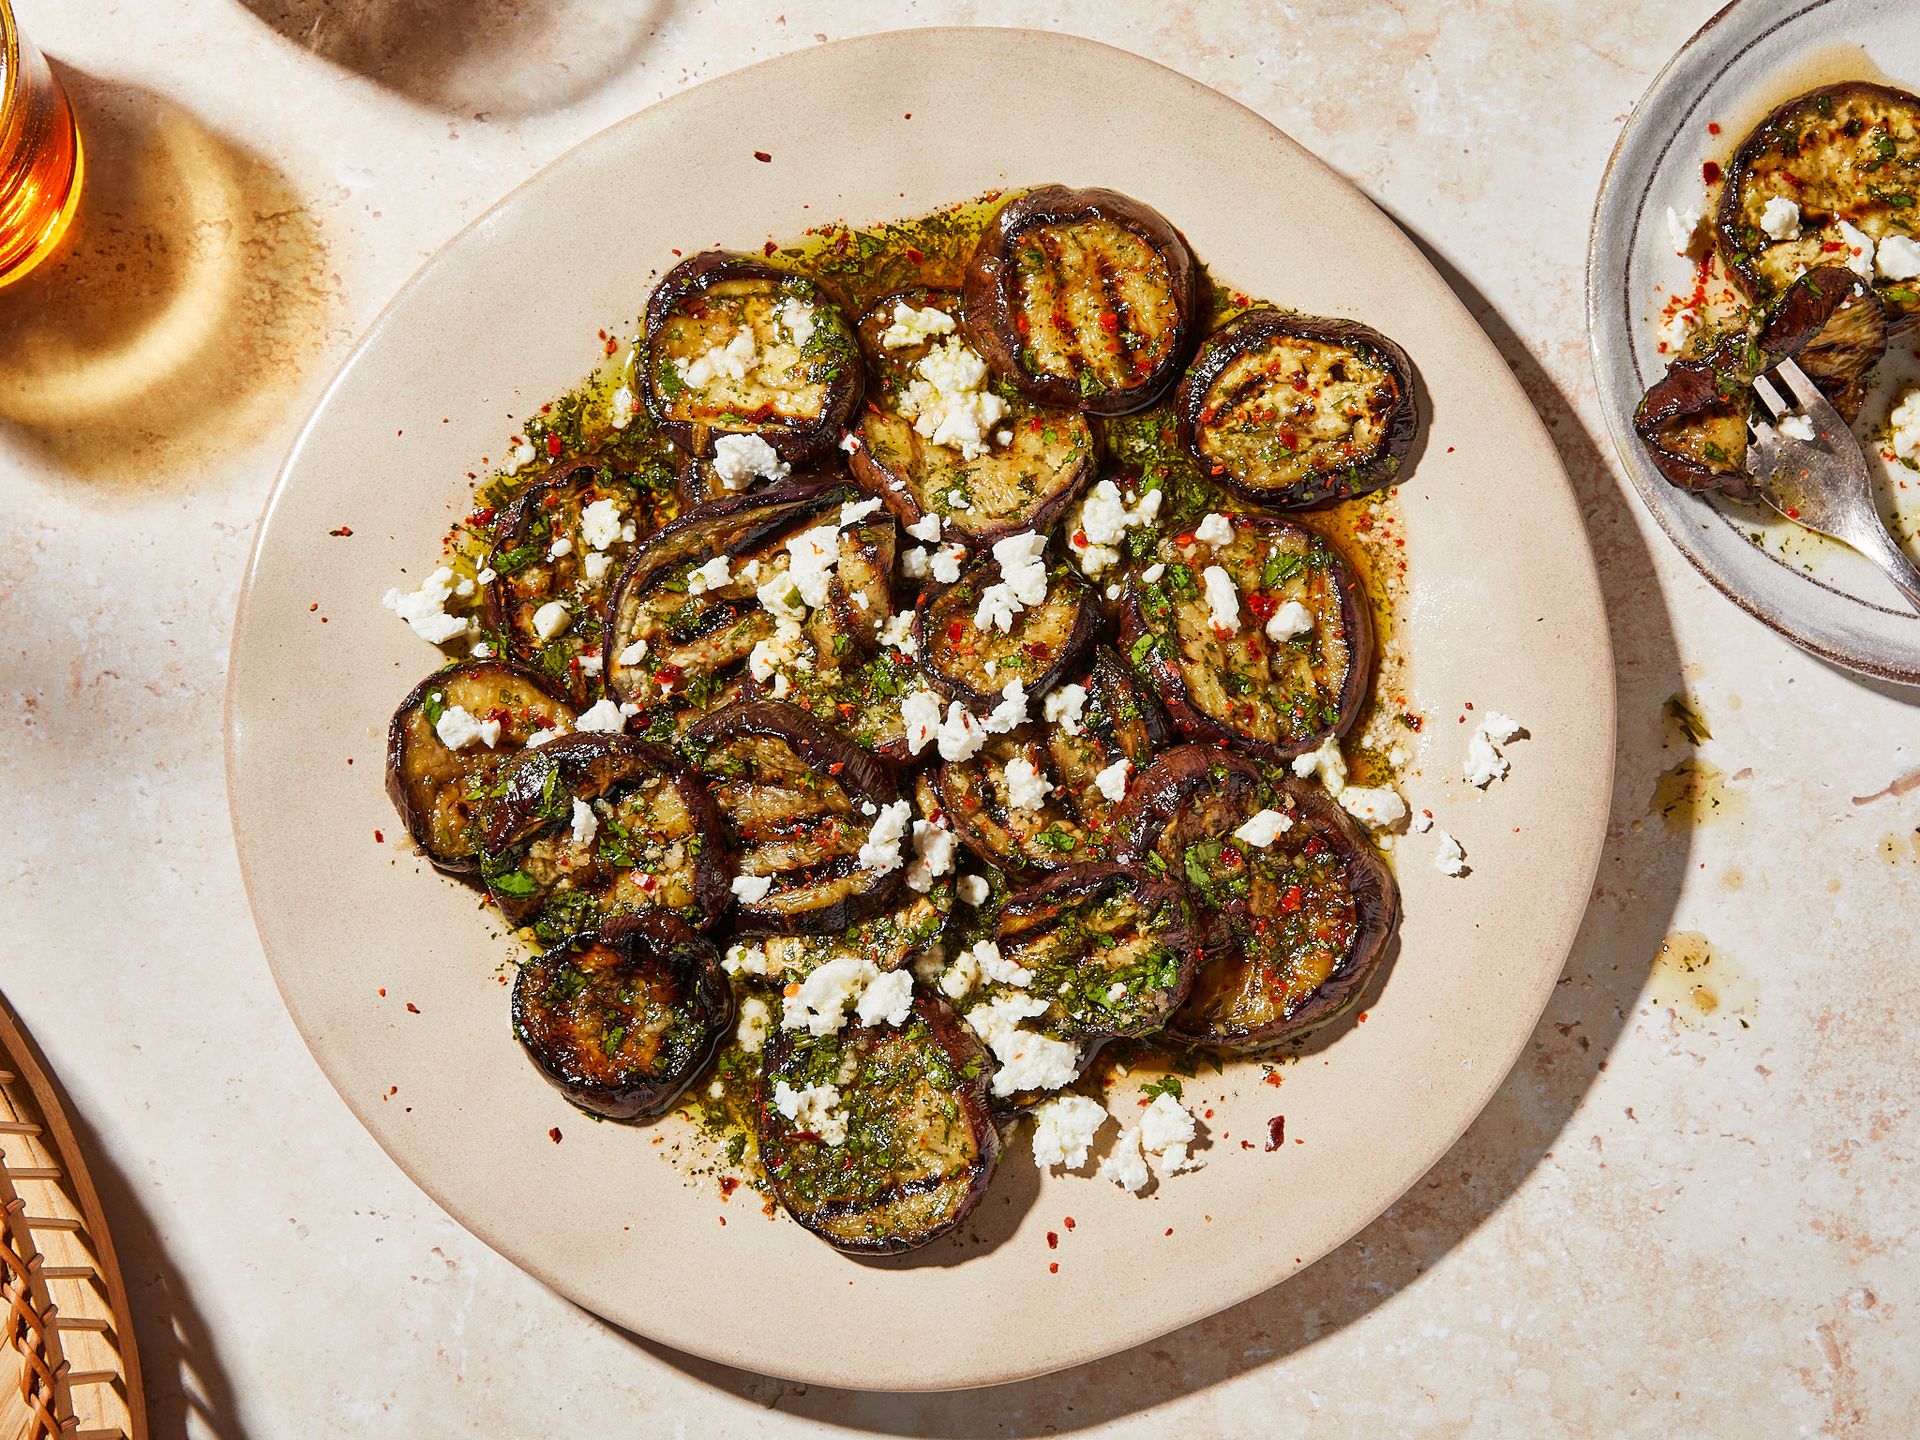 Grilled eggplant with herby garlic dressing